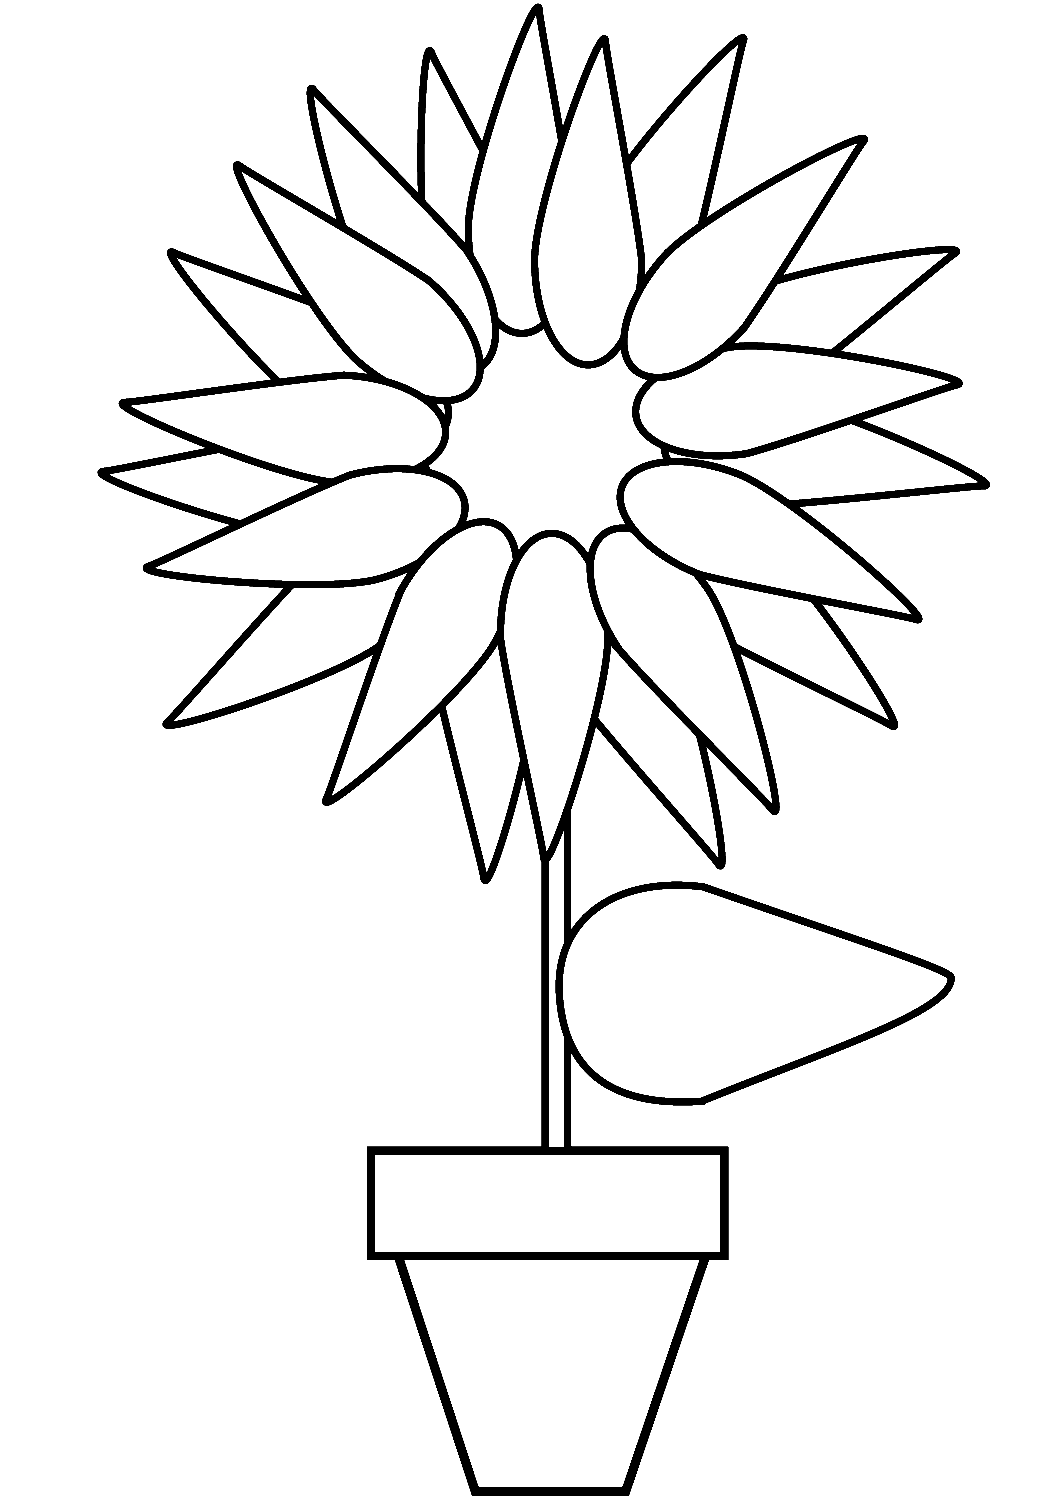 Sunflower in a Pot Coloring Page